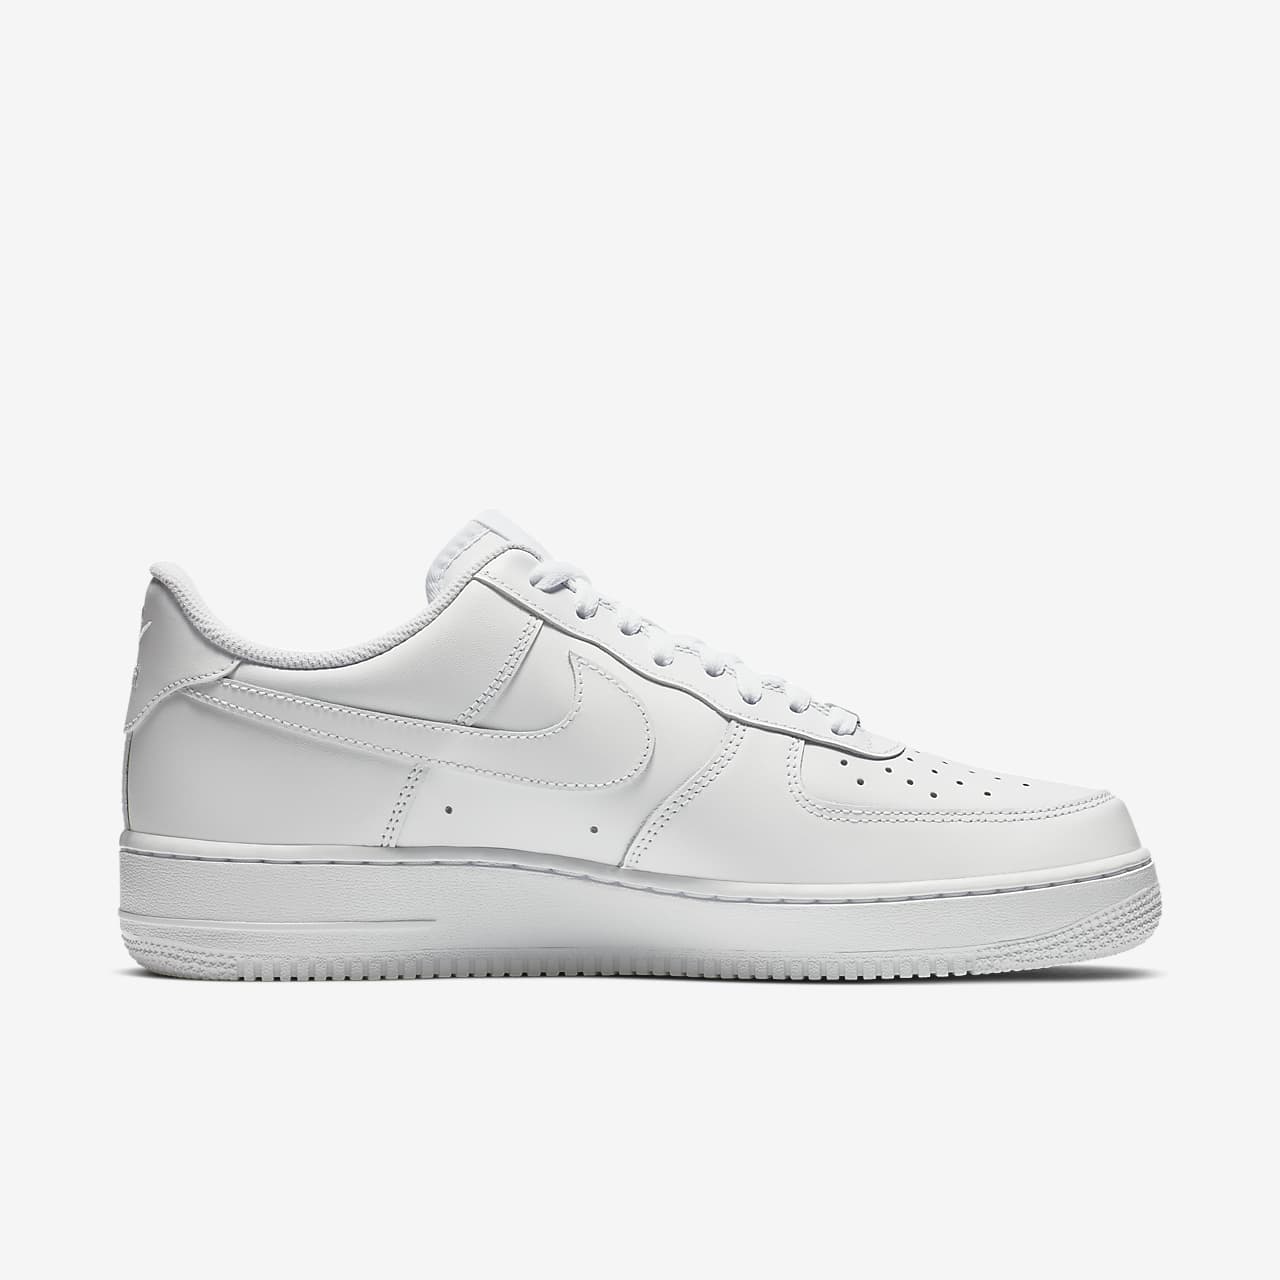 air force 1 bianche nere